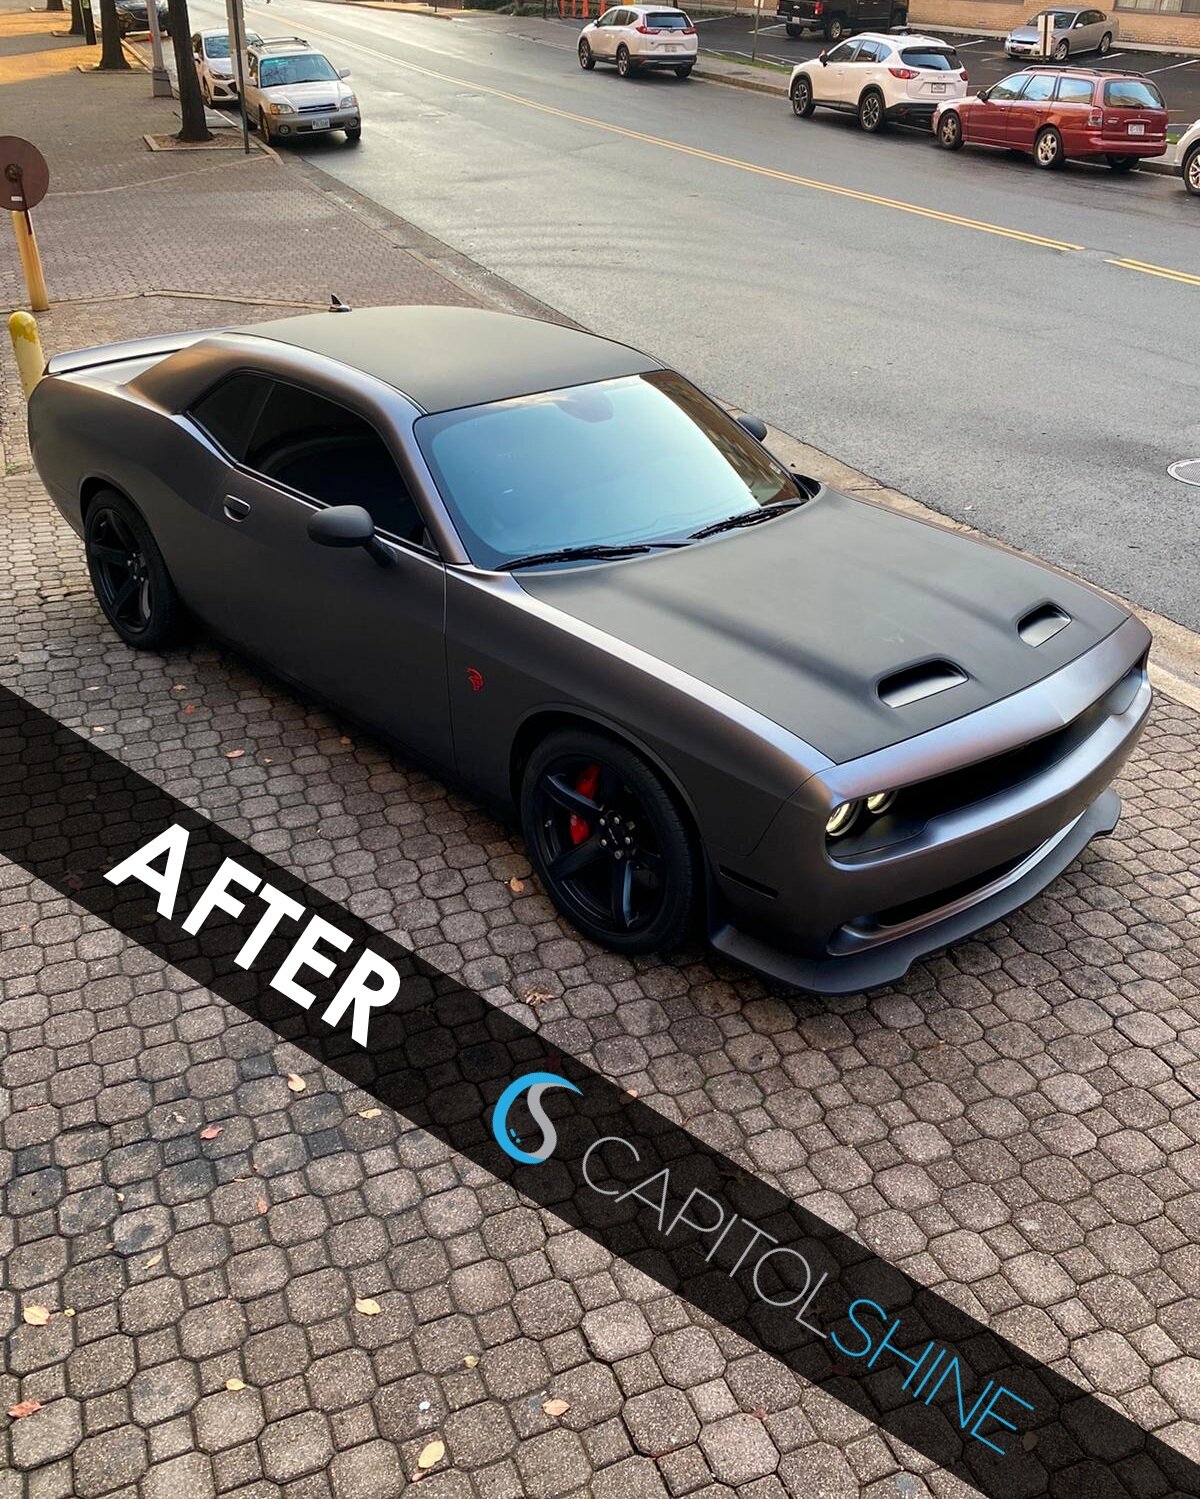 Add A Flat Finish To Your Paint With Vinyl — Capitol Shine Washington DC  Paint Protection Film and Ceramic Coatings